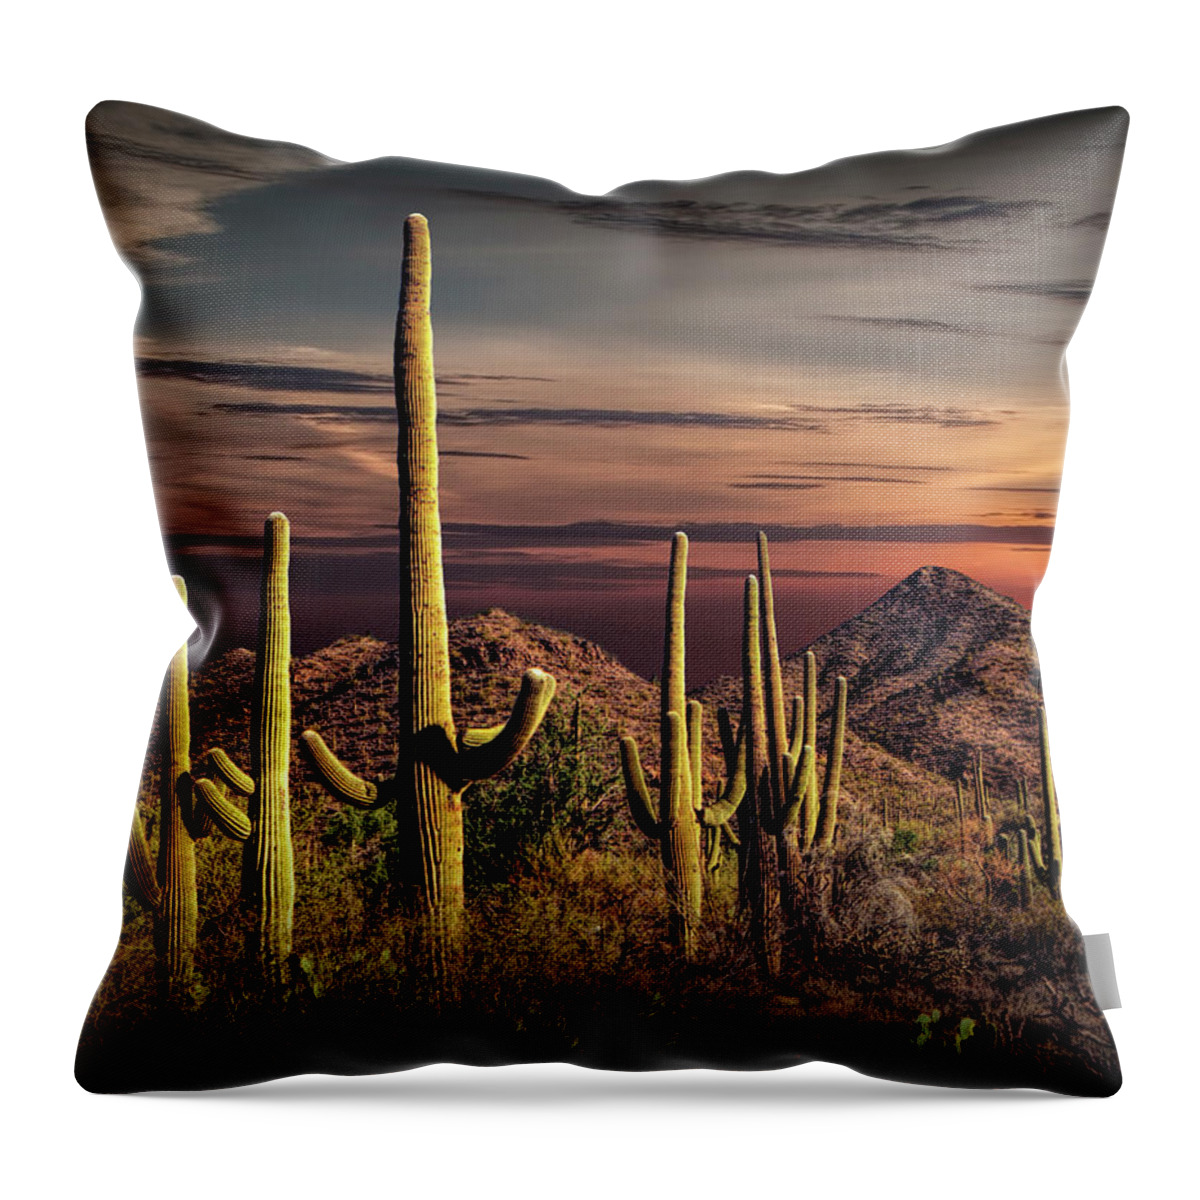 Desert Throw Pillow featuring the photograph Painted Sky over Saguaro Cactuses in Saguaro National Park by Randall Nyhof